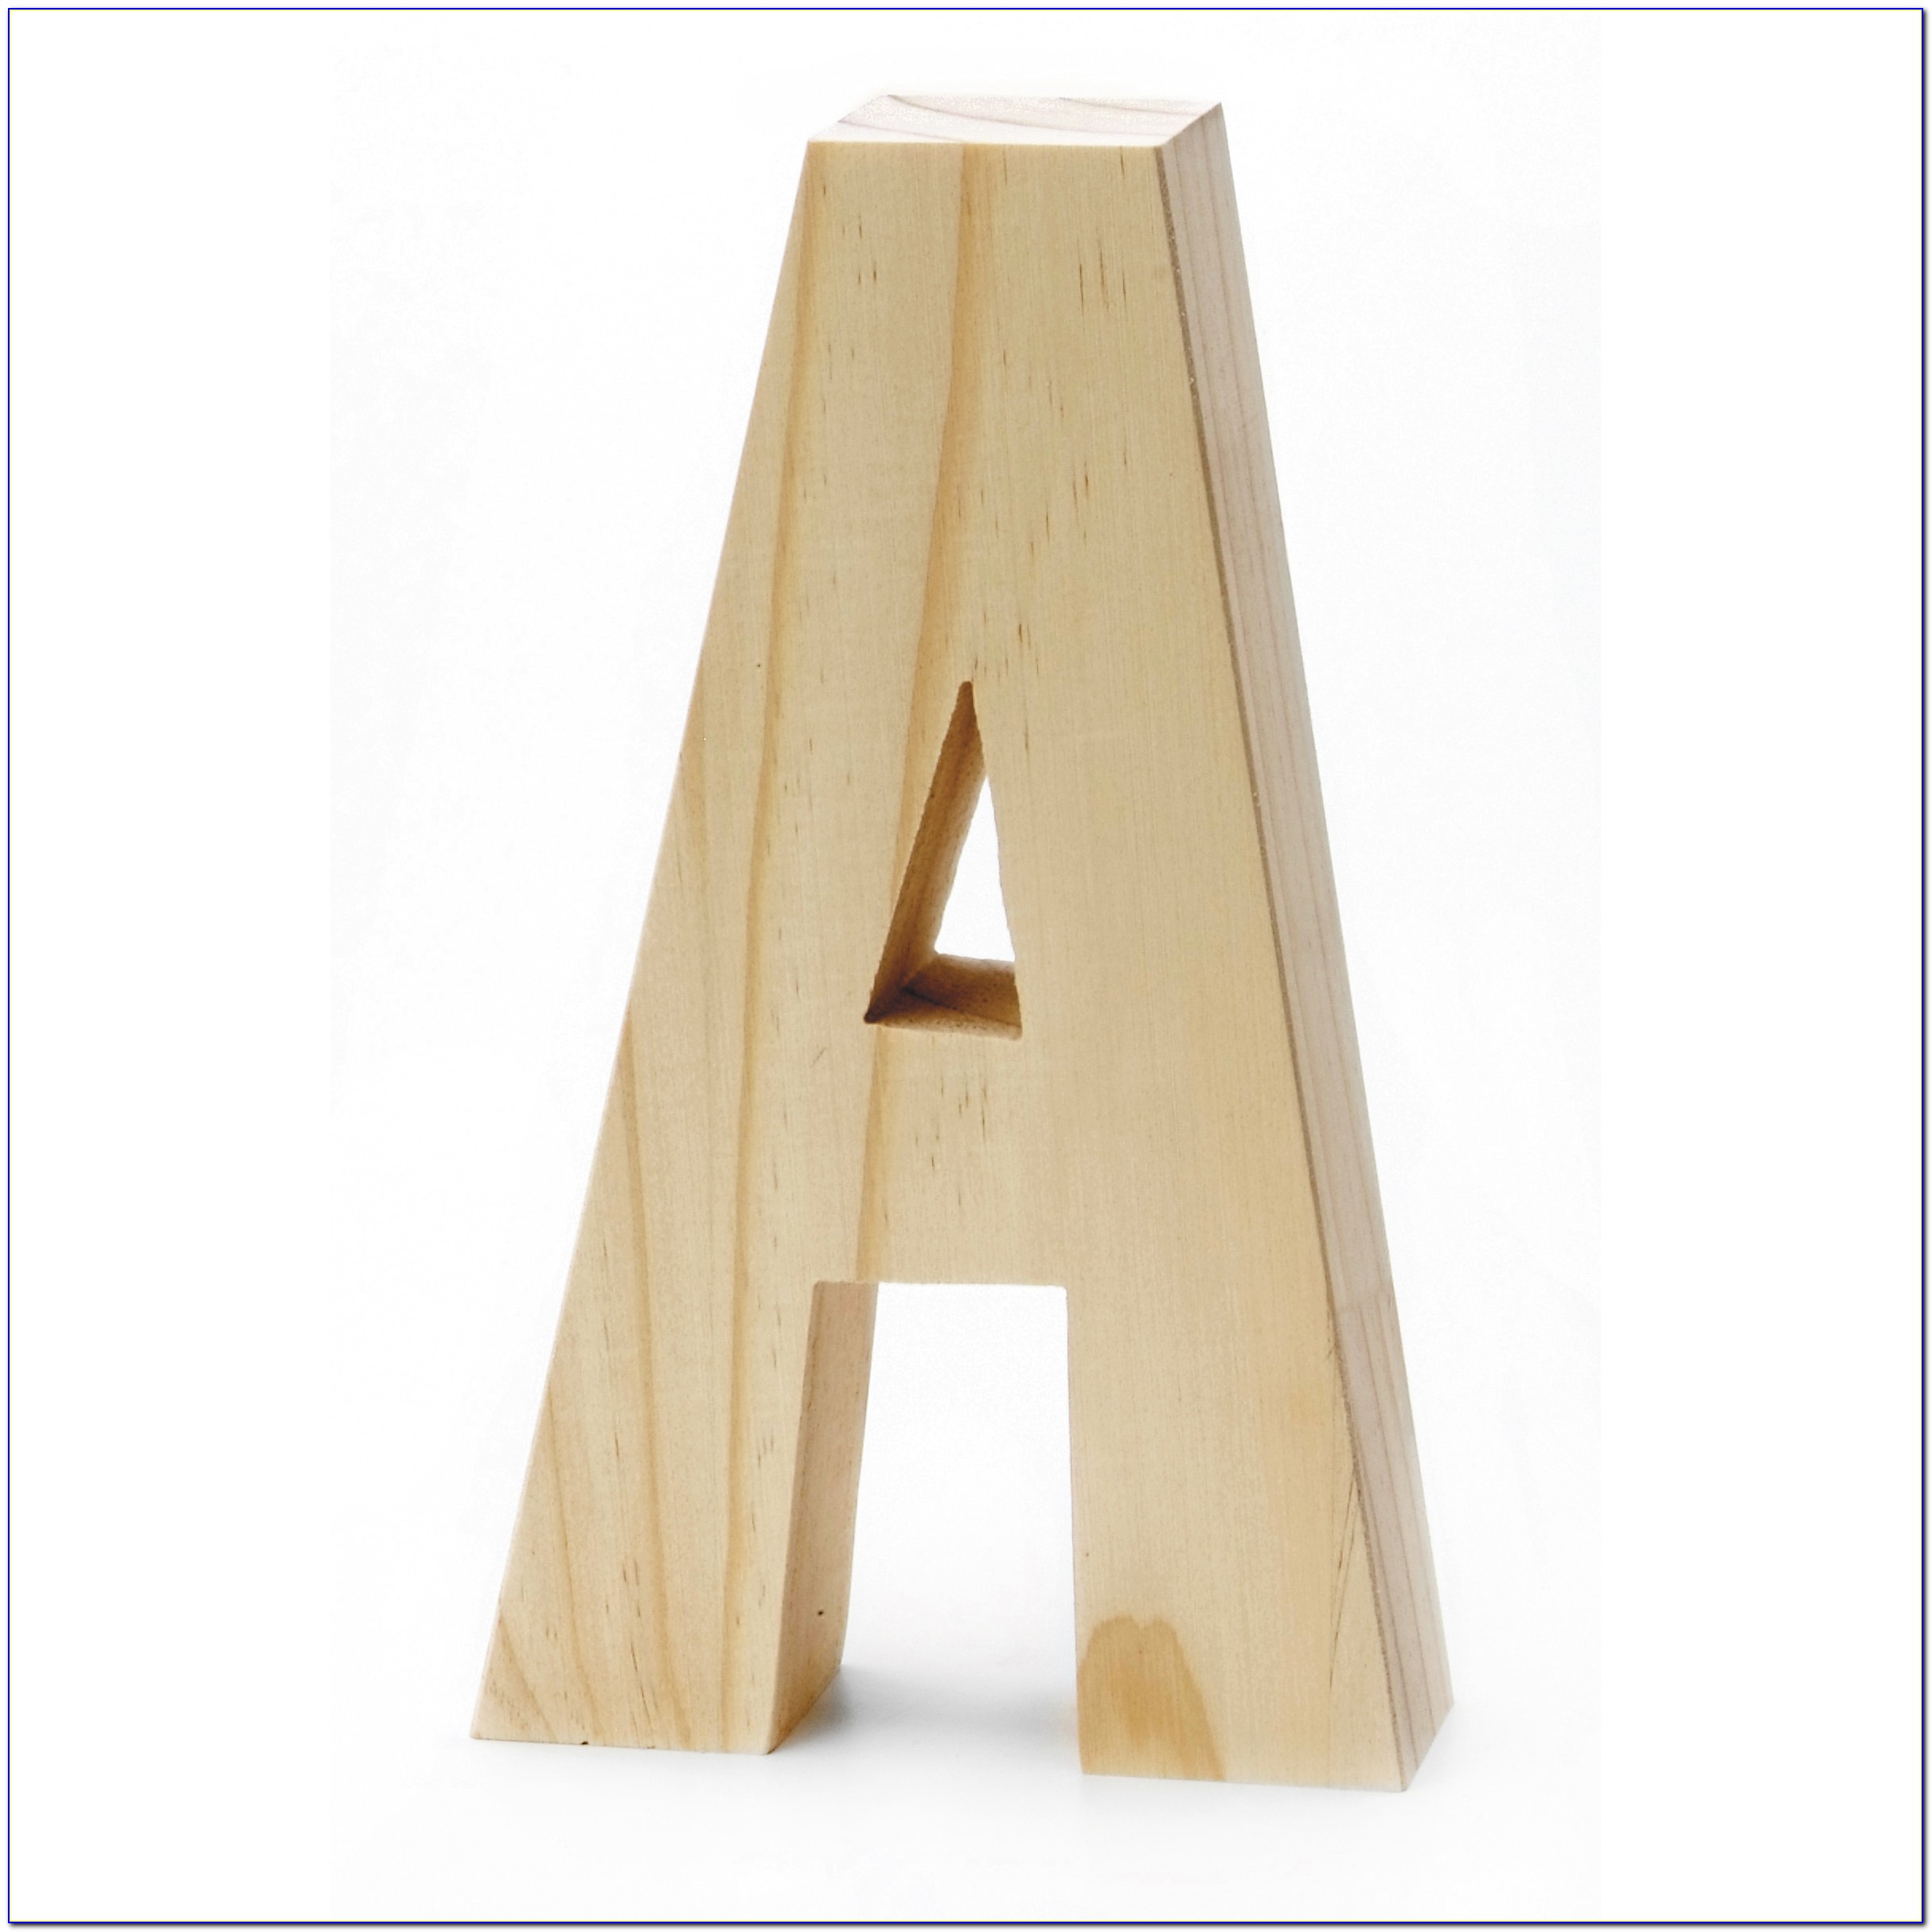 8 Classic Wooden Letters